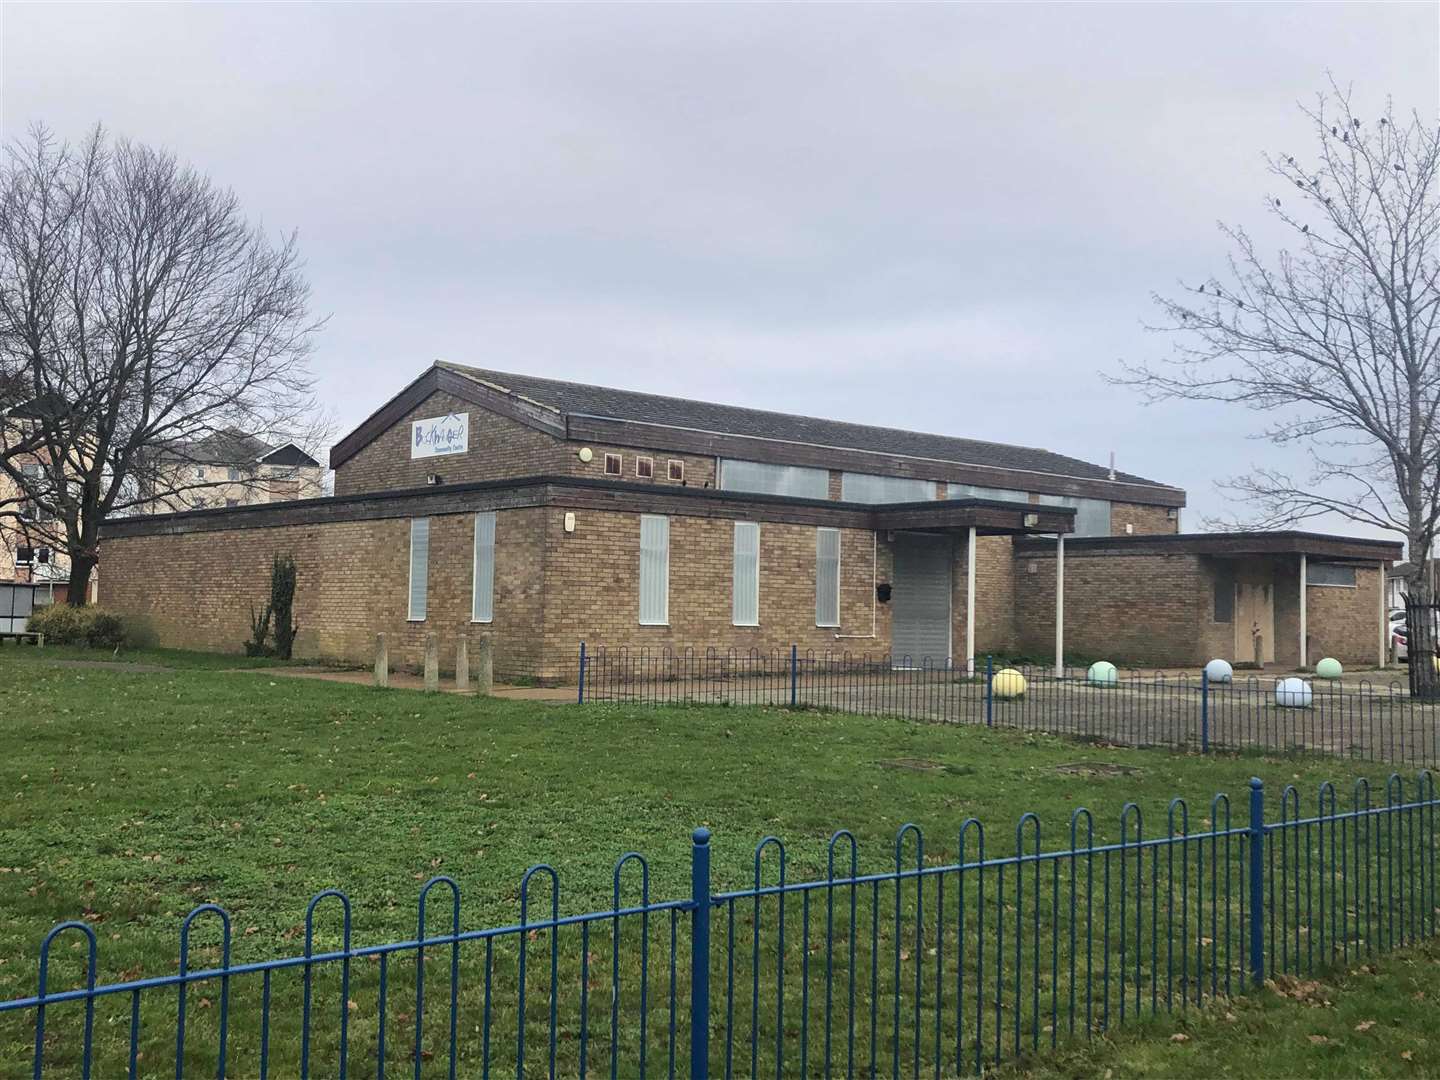 The Bockhanger Community Centre has been closed since March last year